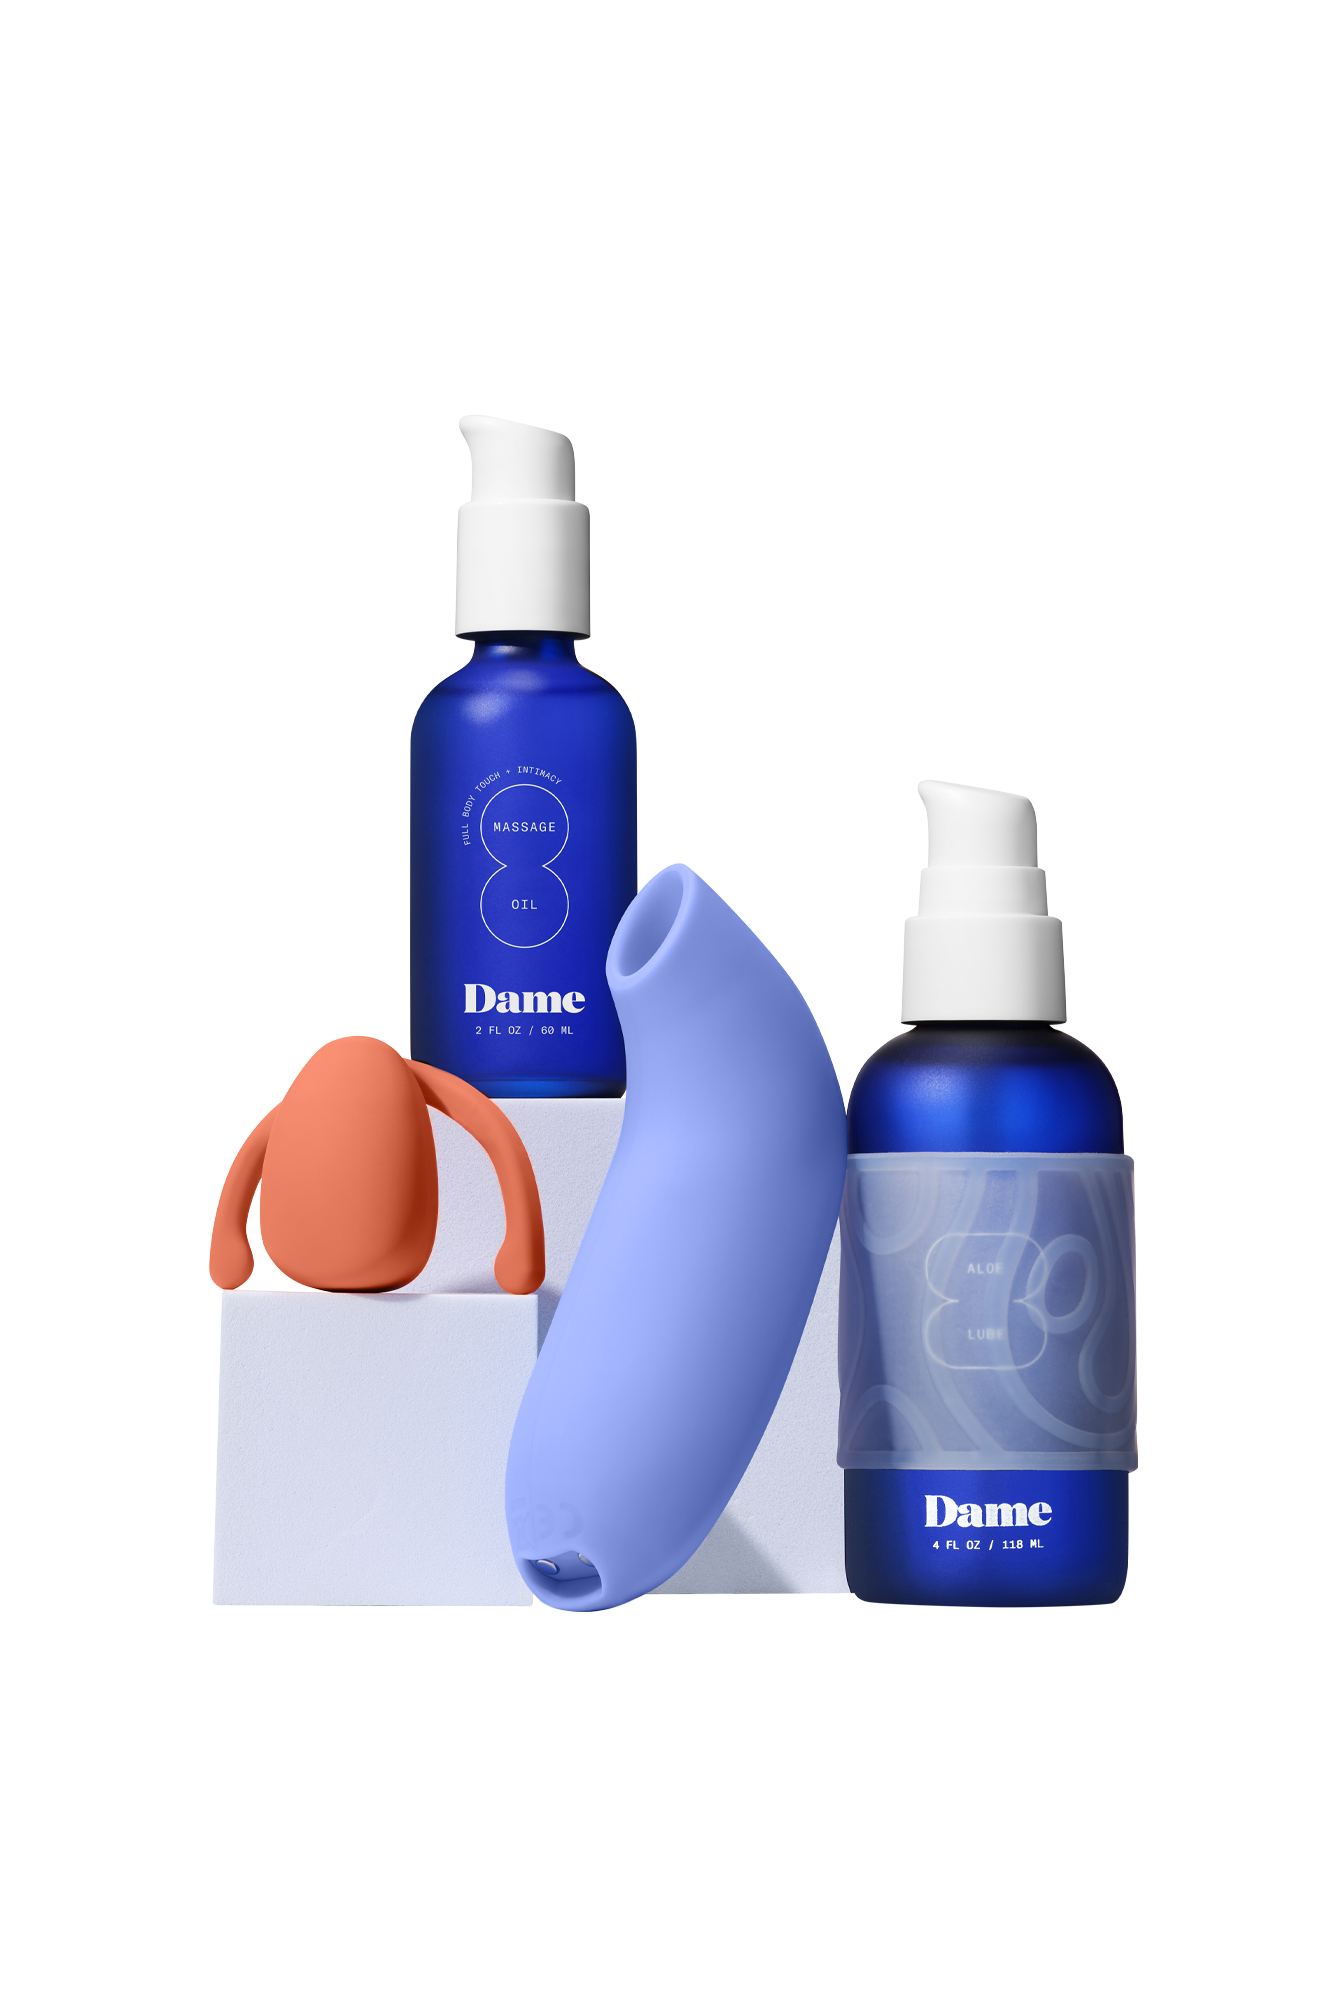 Seamless | Two blue bottles, one with a clear grip, next to two vibrators.